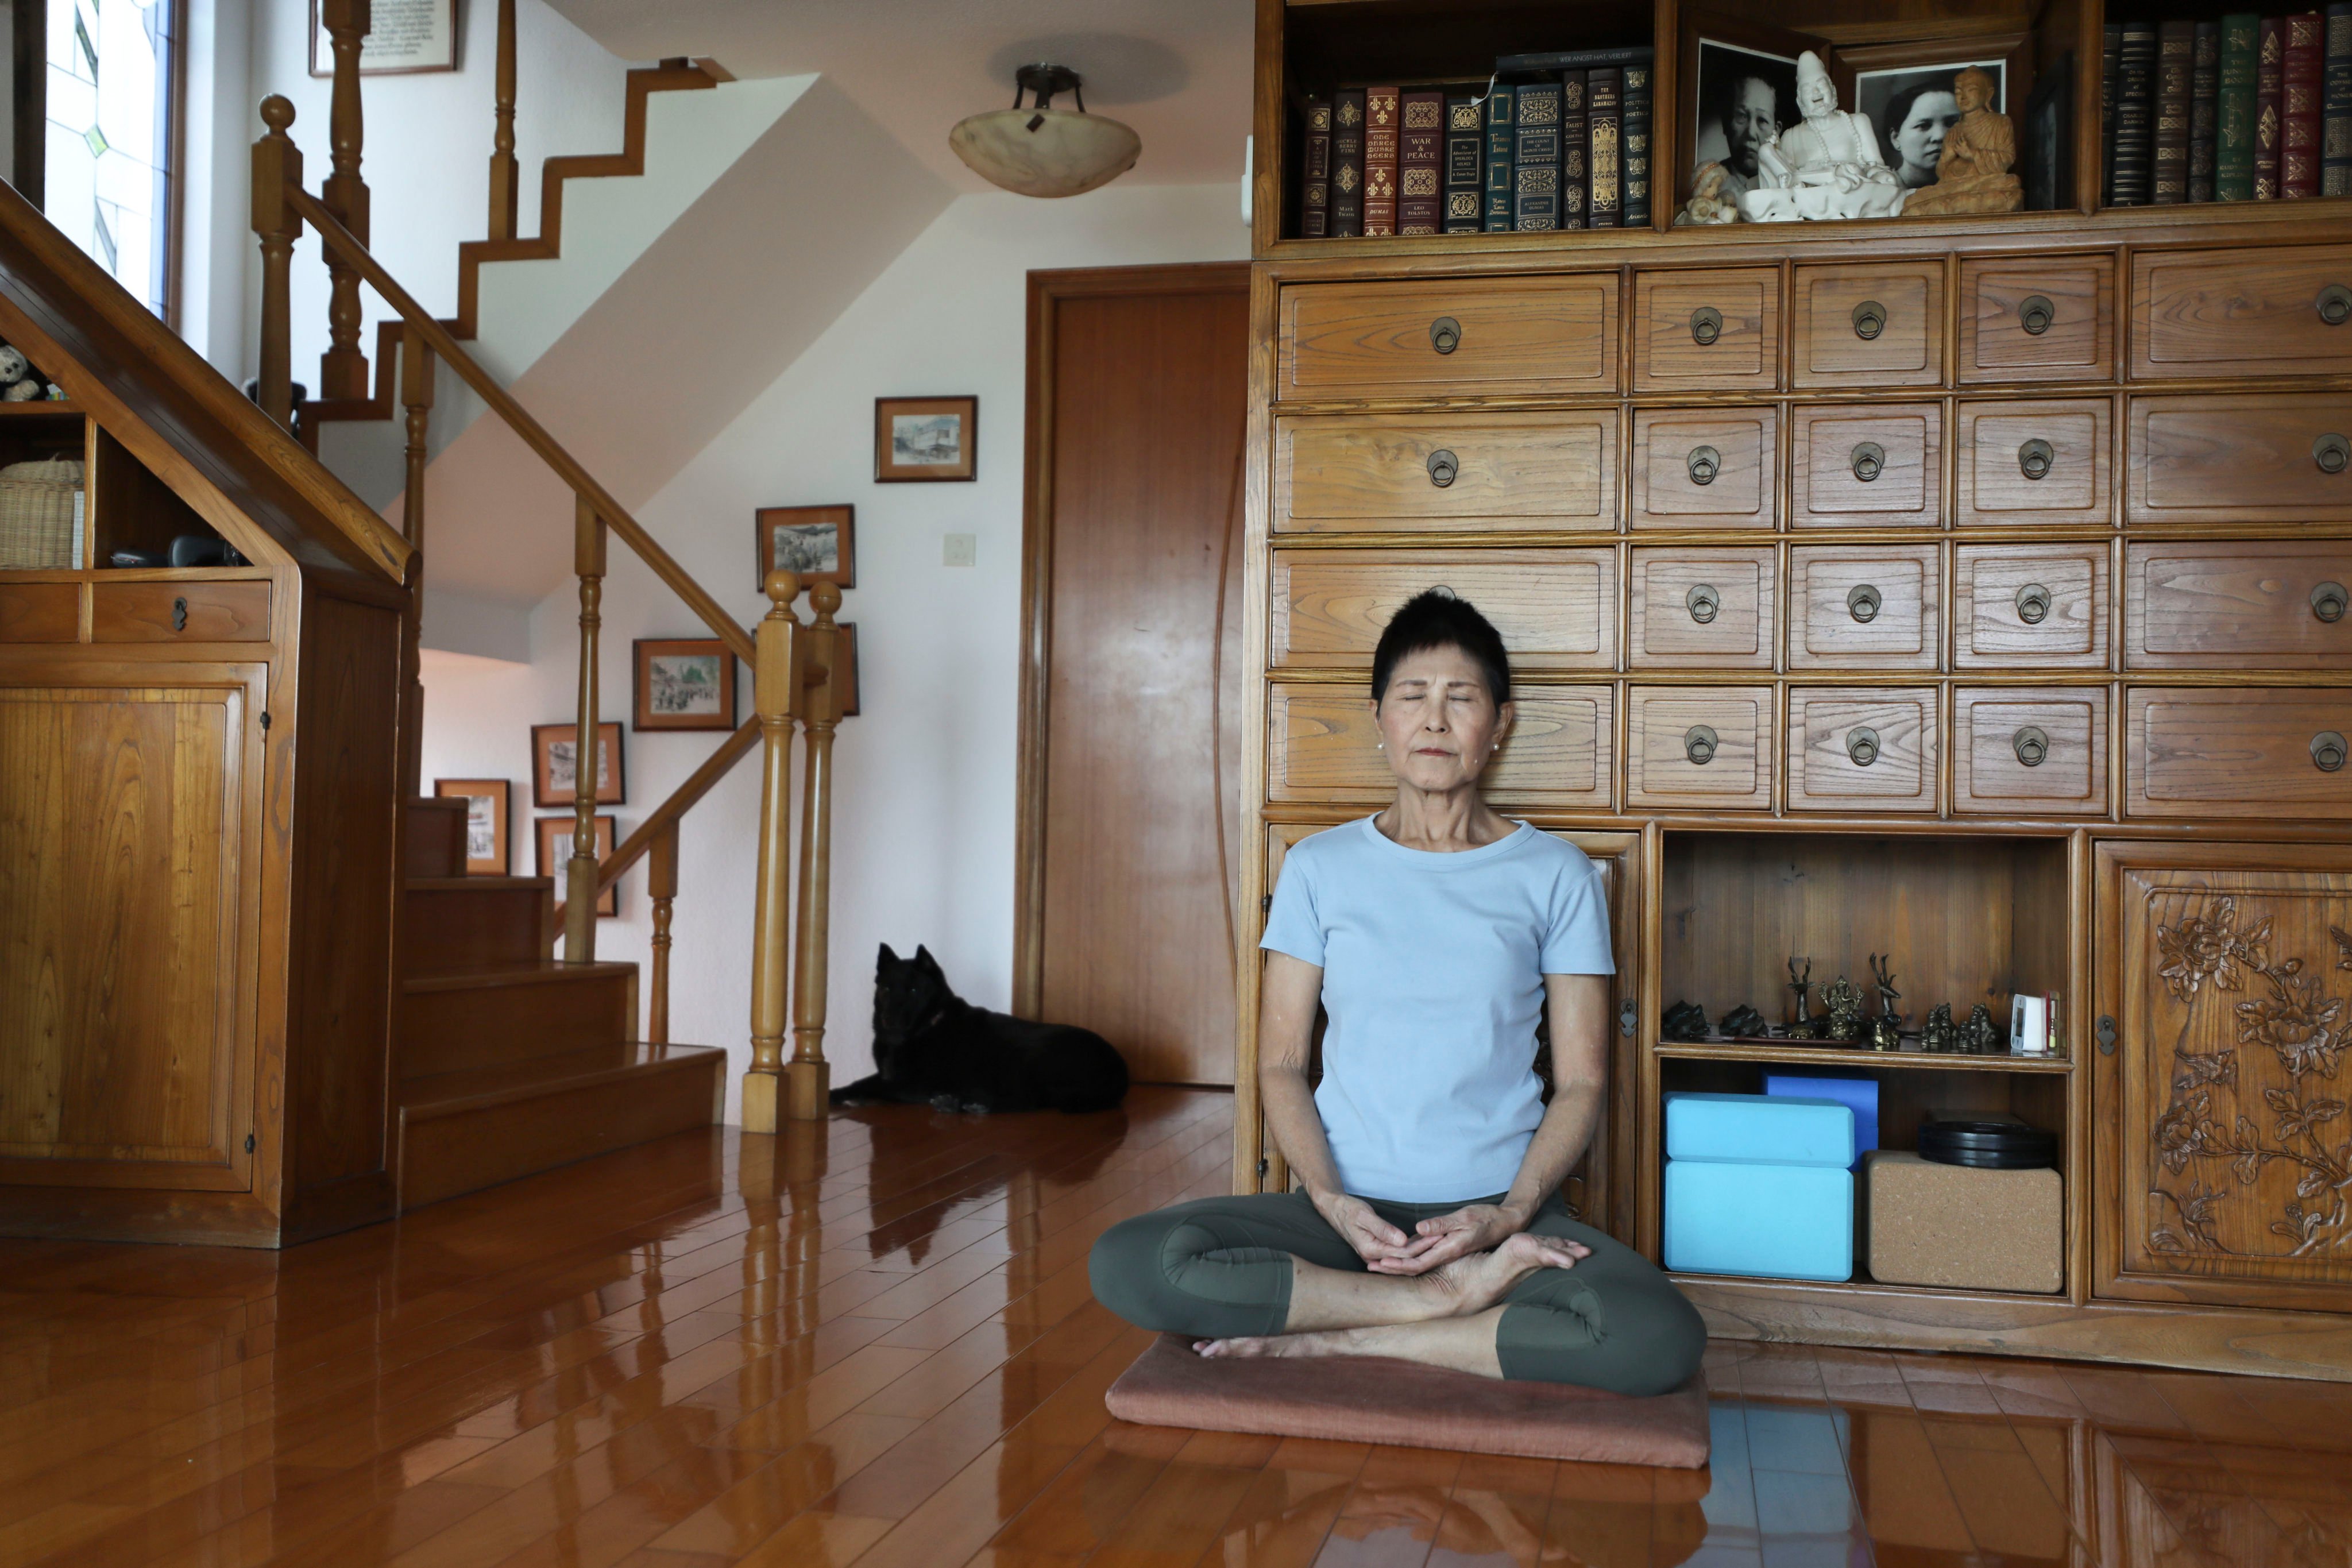 A good attitude and a belief in the healing power of your body are important, says Thai Buddhist Siriluck, who has fought cancer for 16 years, but  accepts conventional treatment is vital, too. Photo: Xiaomei Chen